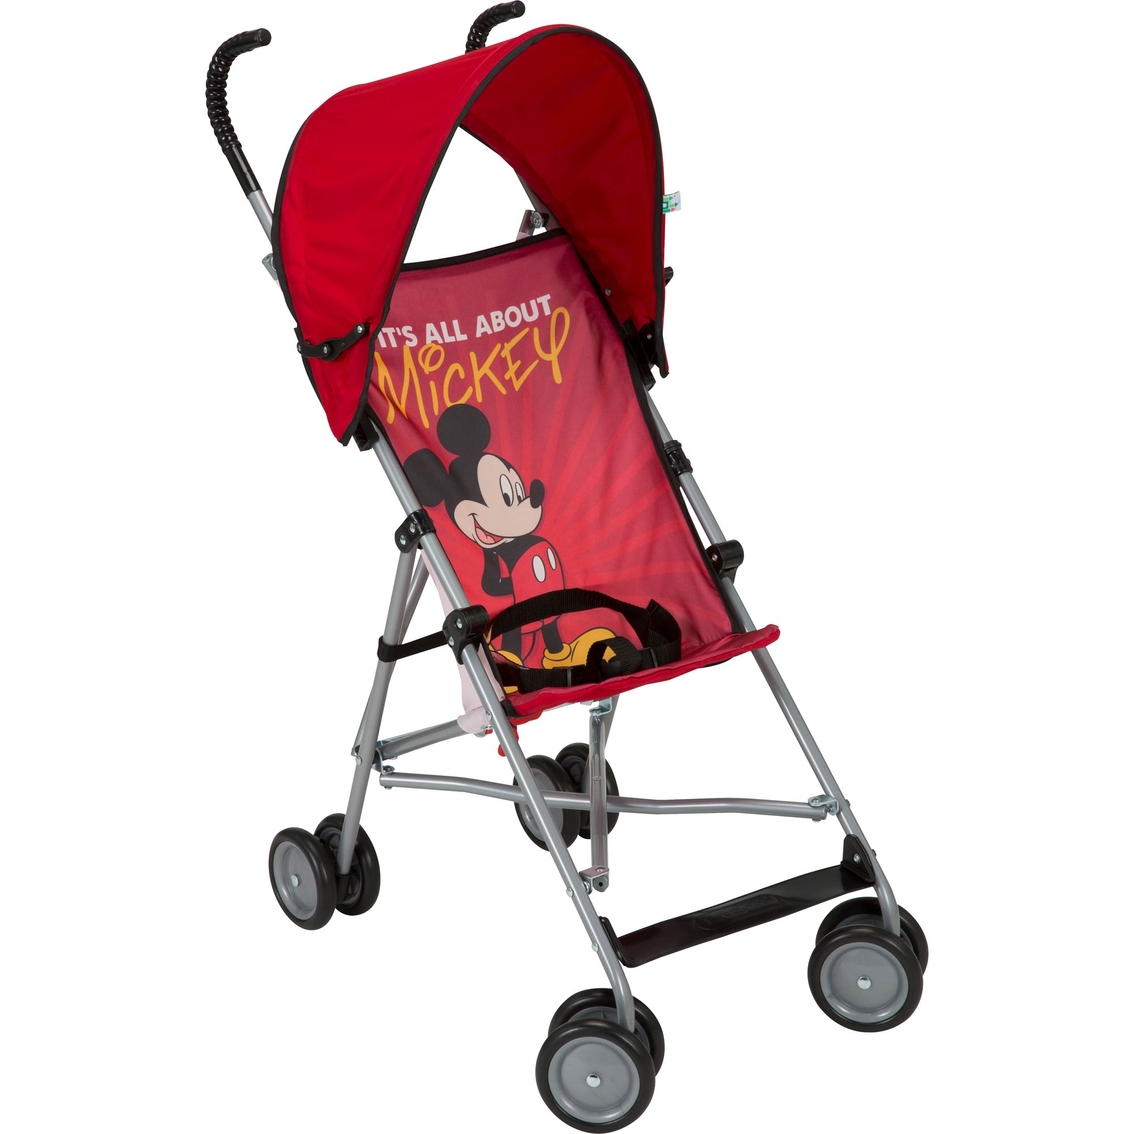 Disney Baby Umbrella Stroller With Canopy, All About Mickey